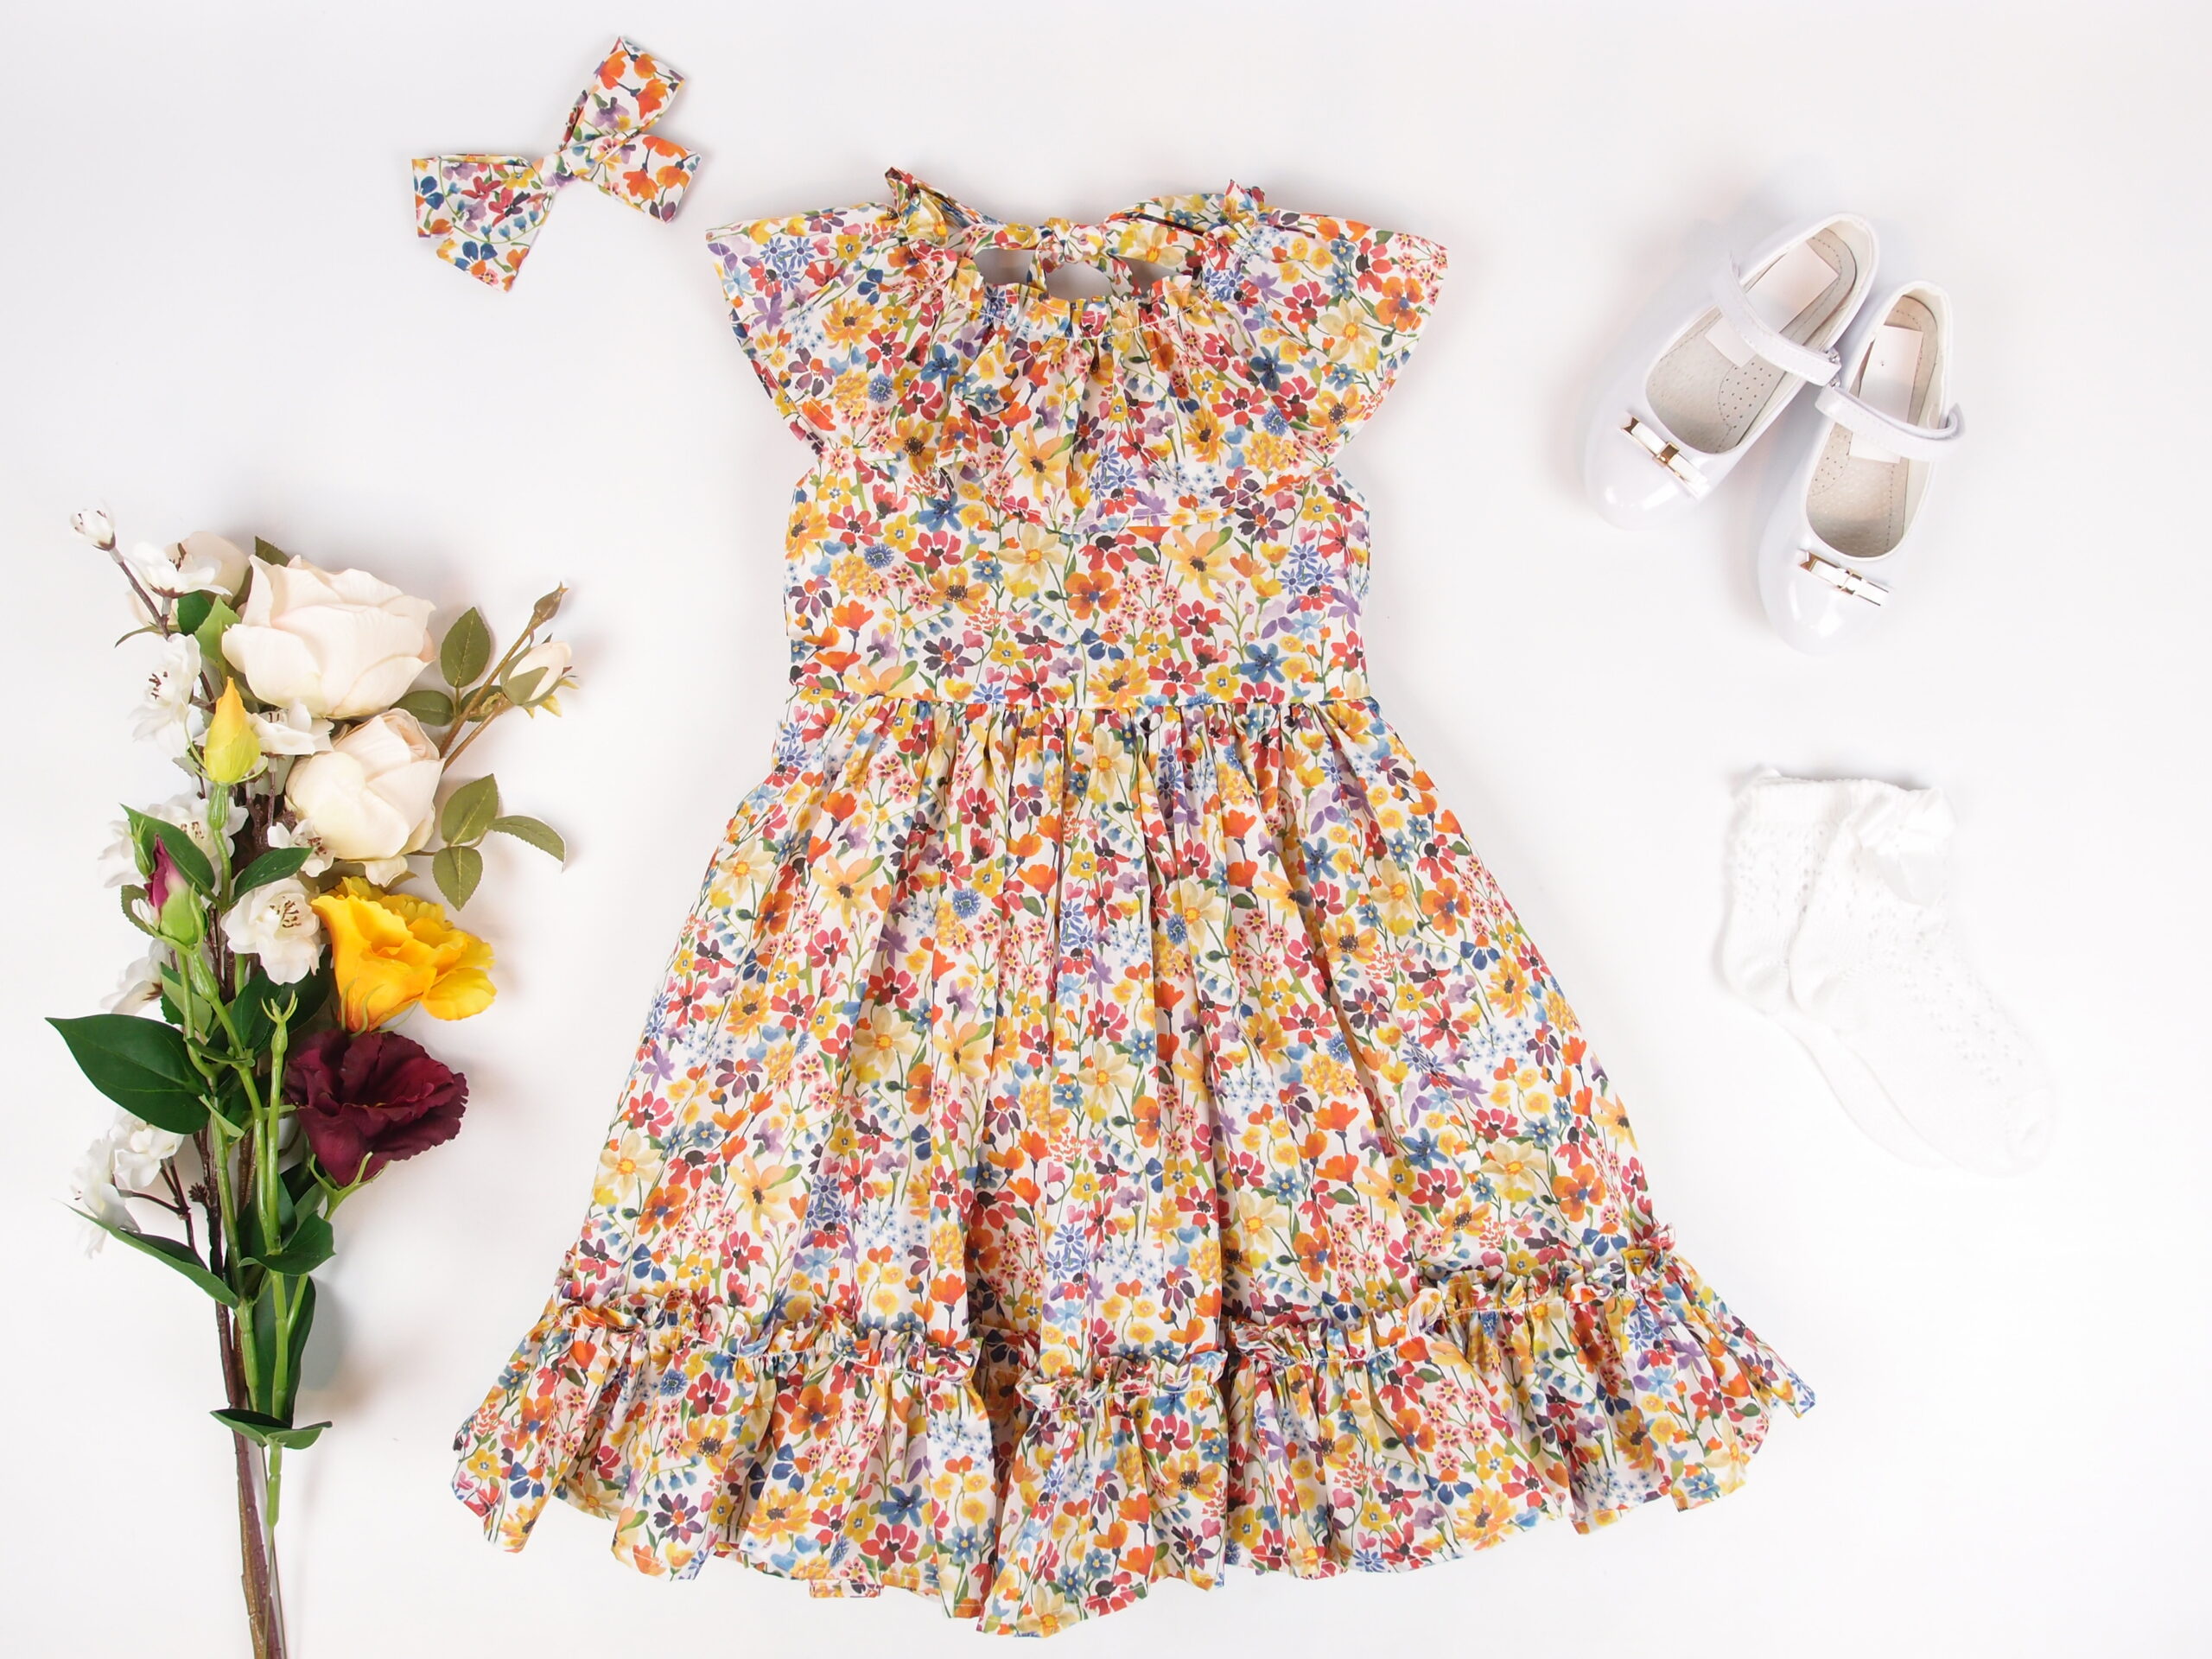 floral girl dress with ruffles at neckline liberty fabric